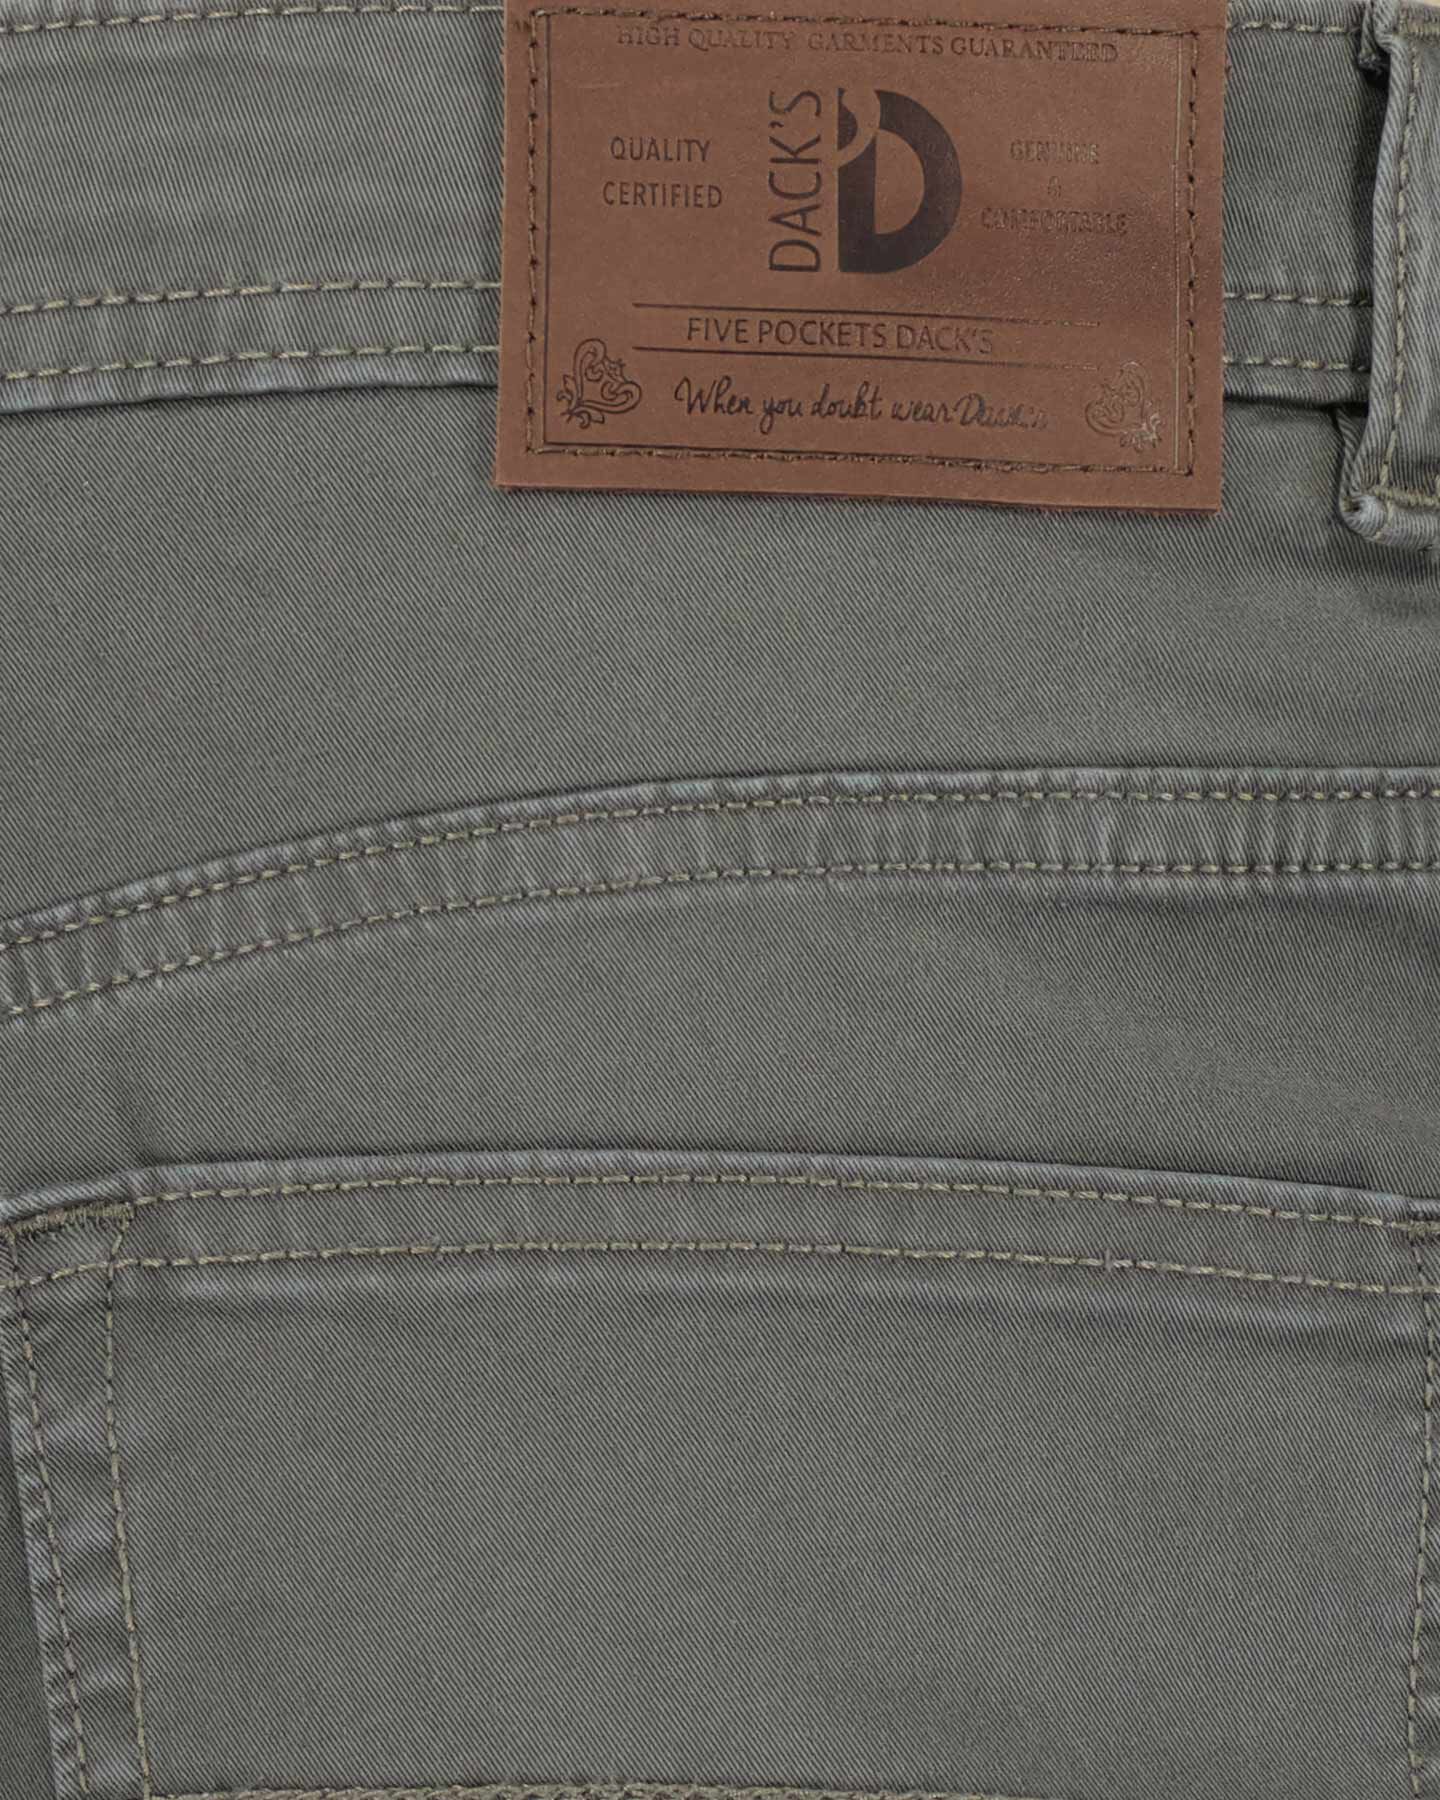  Pantalone DACK'S BASIC COLLECTION M S4118688|040|56 scatto 4